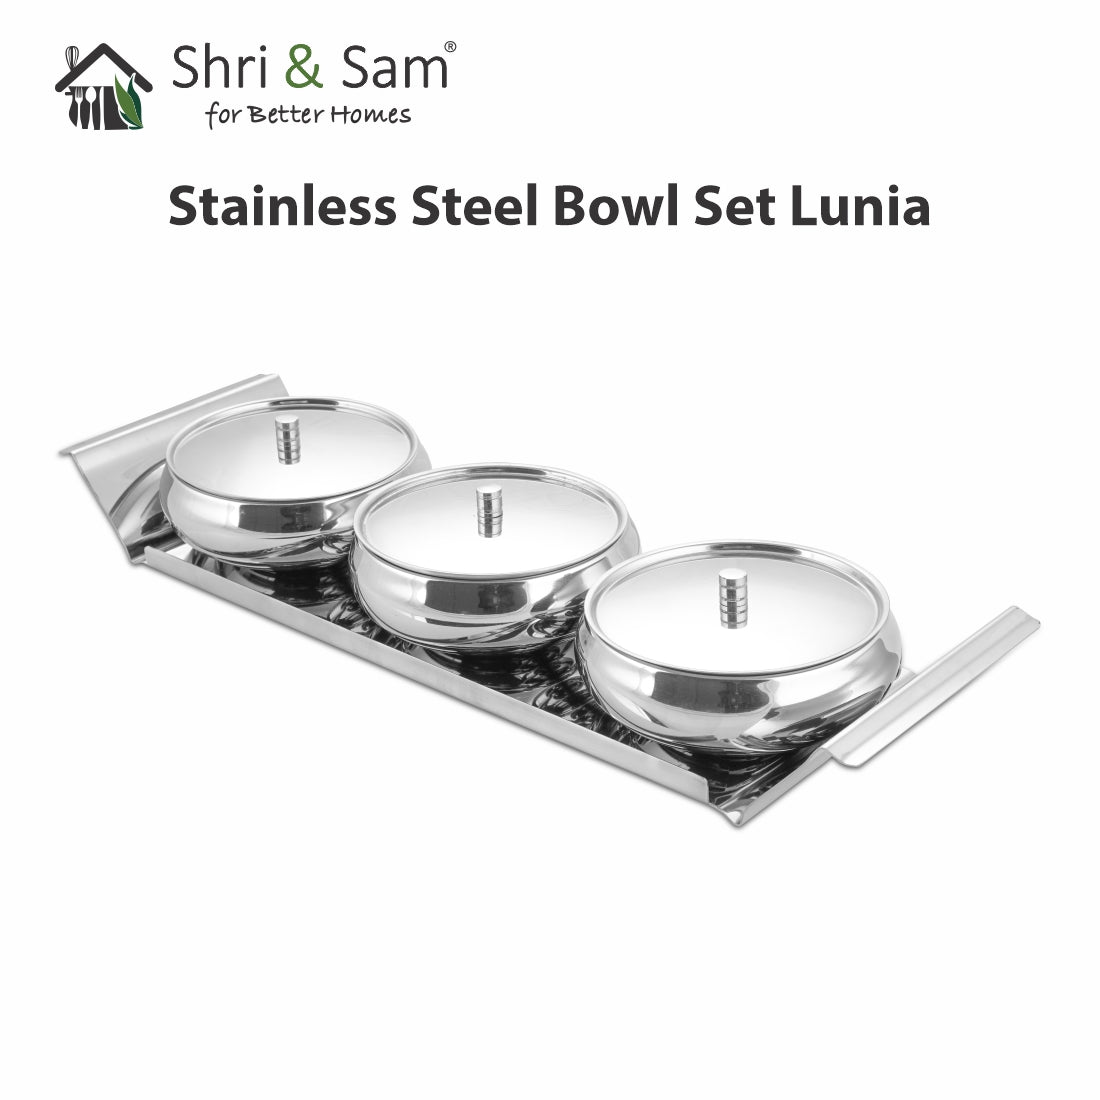 Stainless Steel Bowl Set Lunia